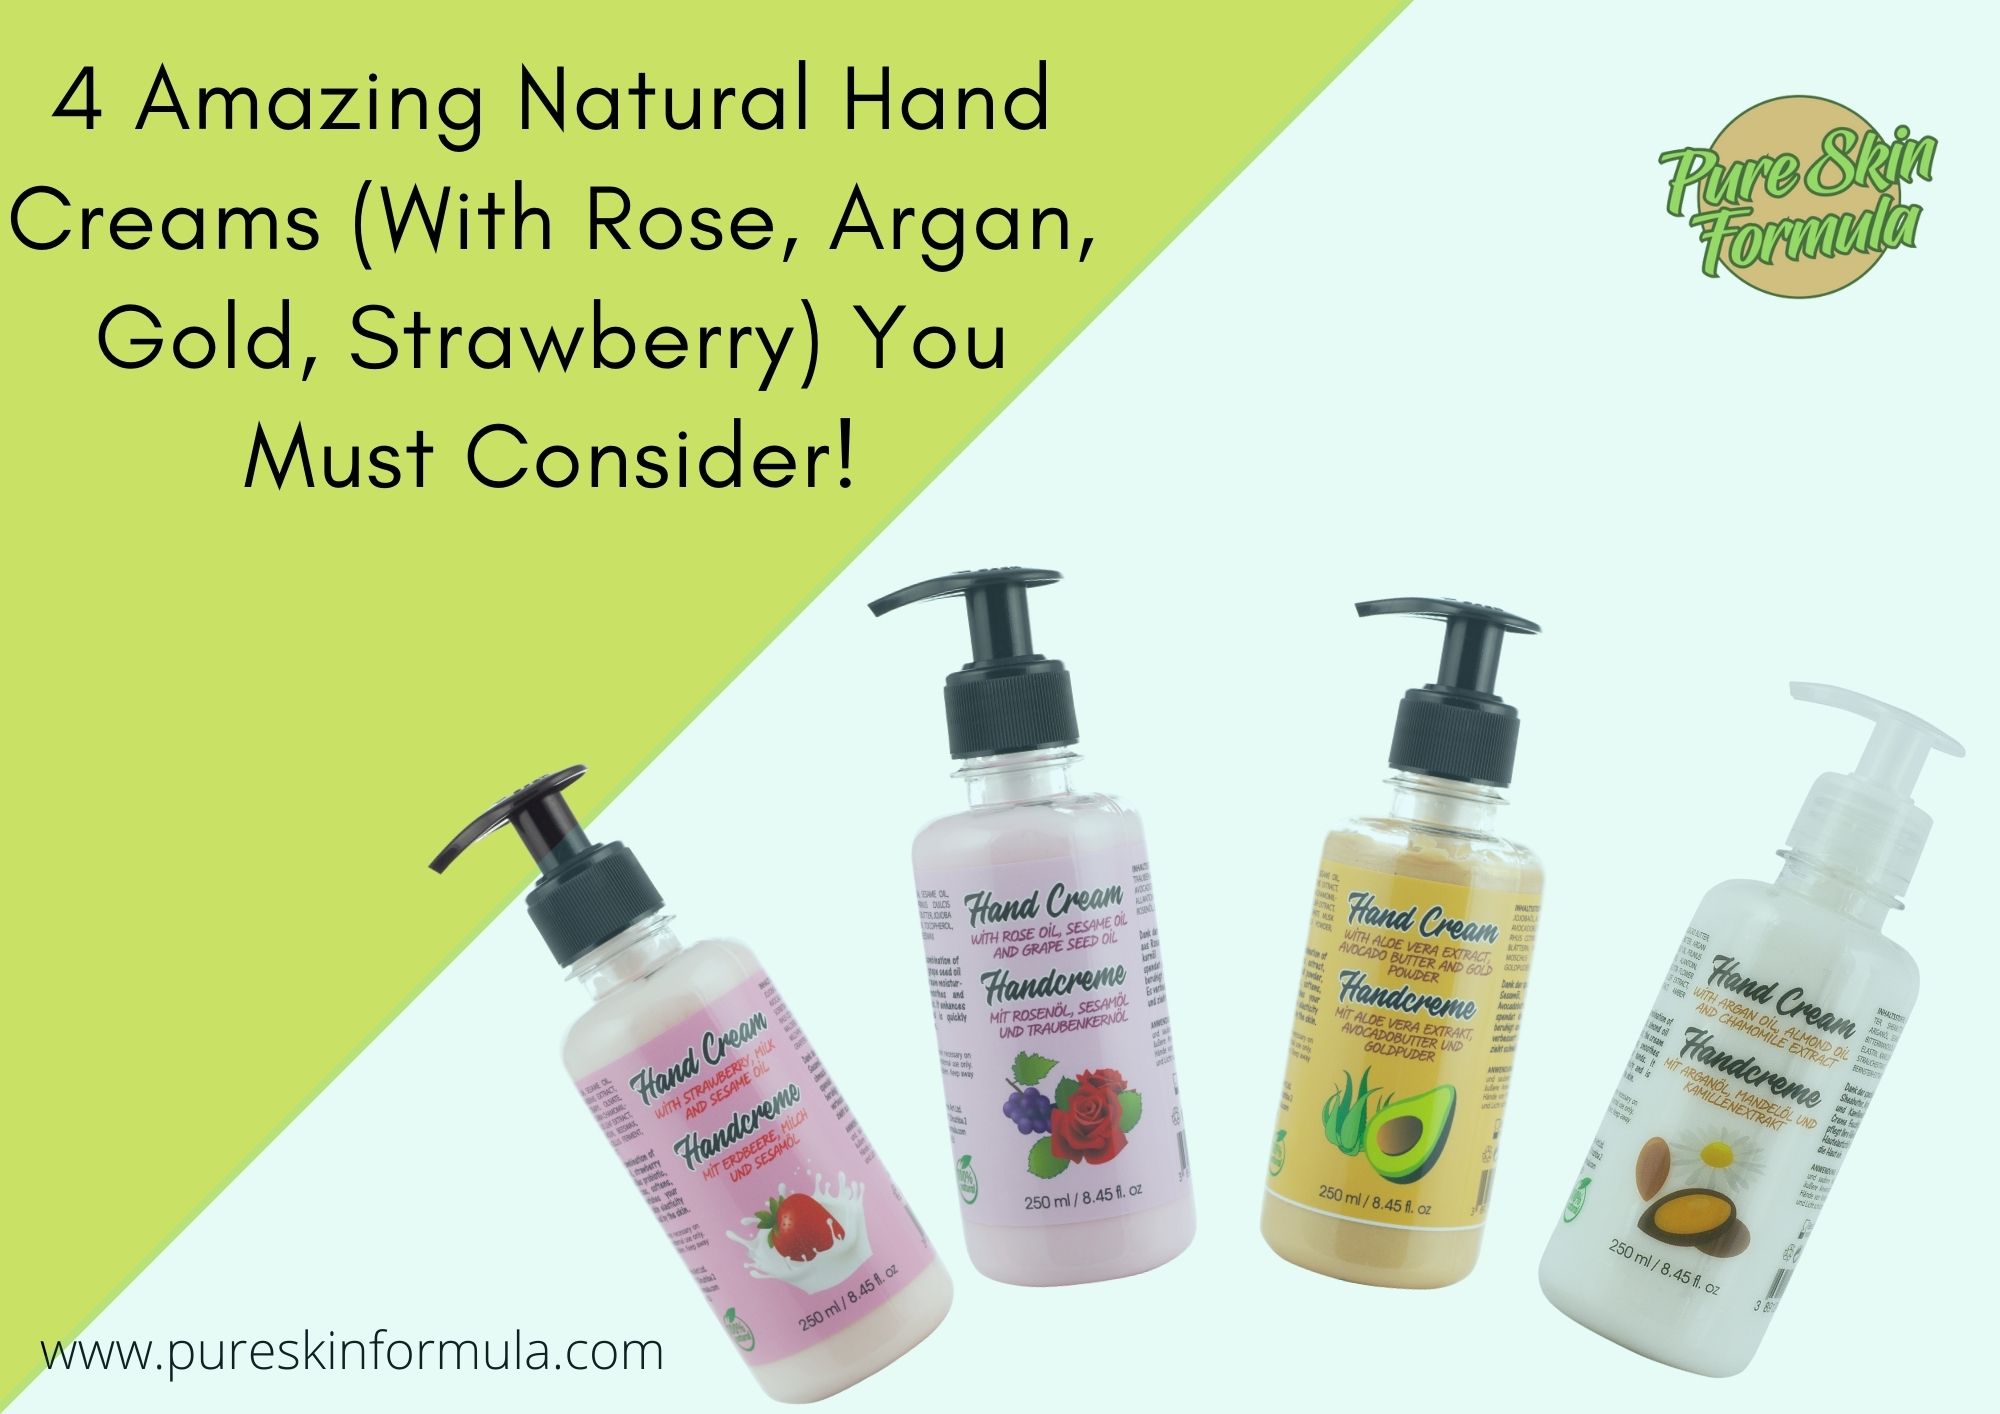 4 Amazing Hand Creams With Rose, Argan, Strawberry, Gold